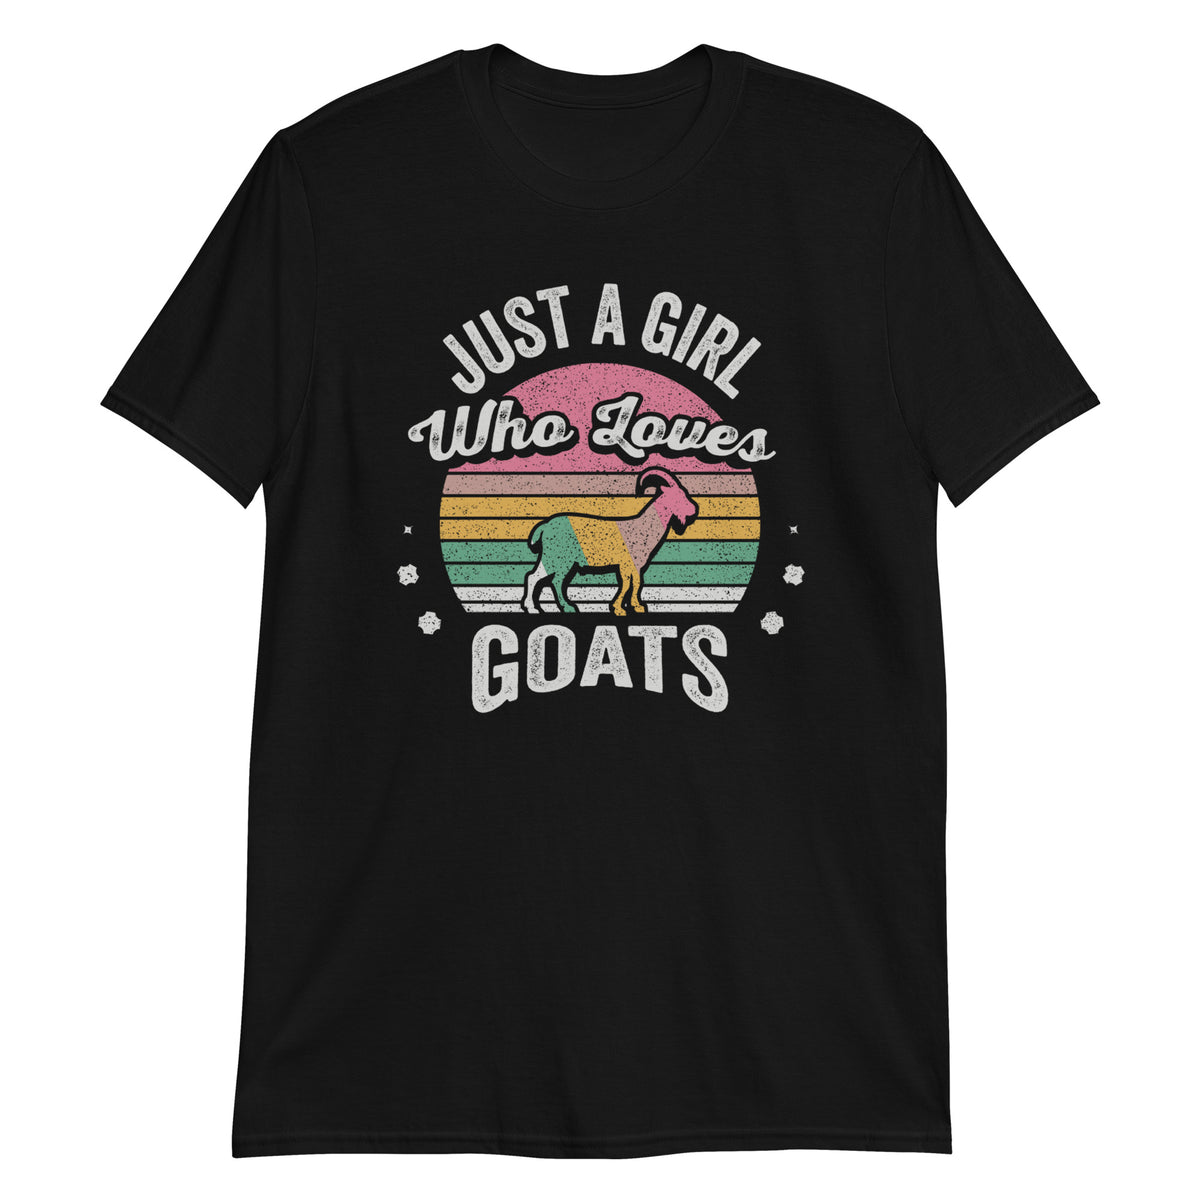 Just A Girl Who Loves Goats Goat Lover Retro Vintage T-Shirt